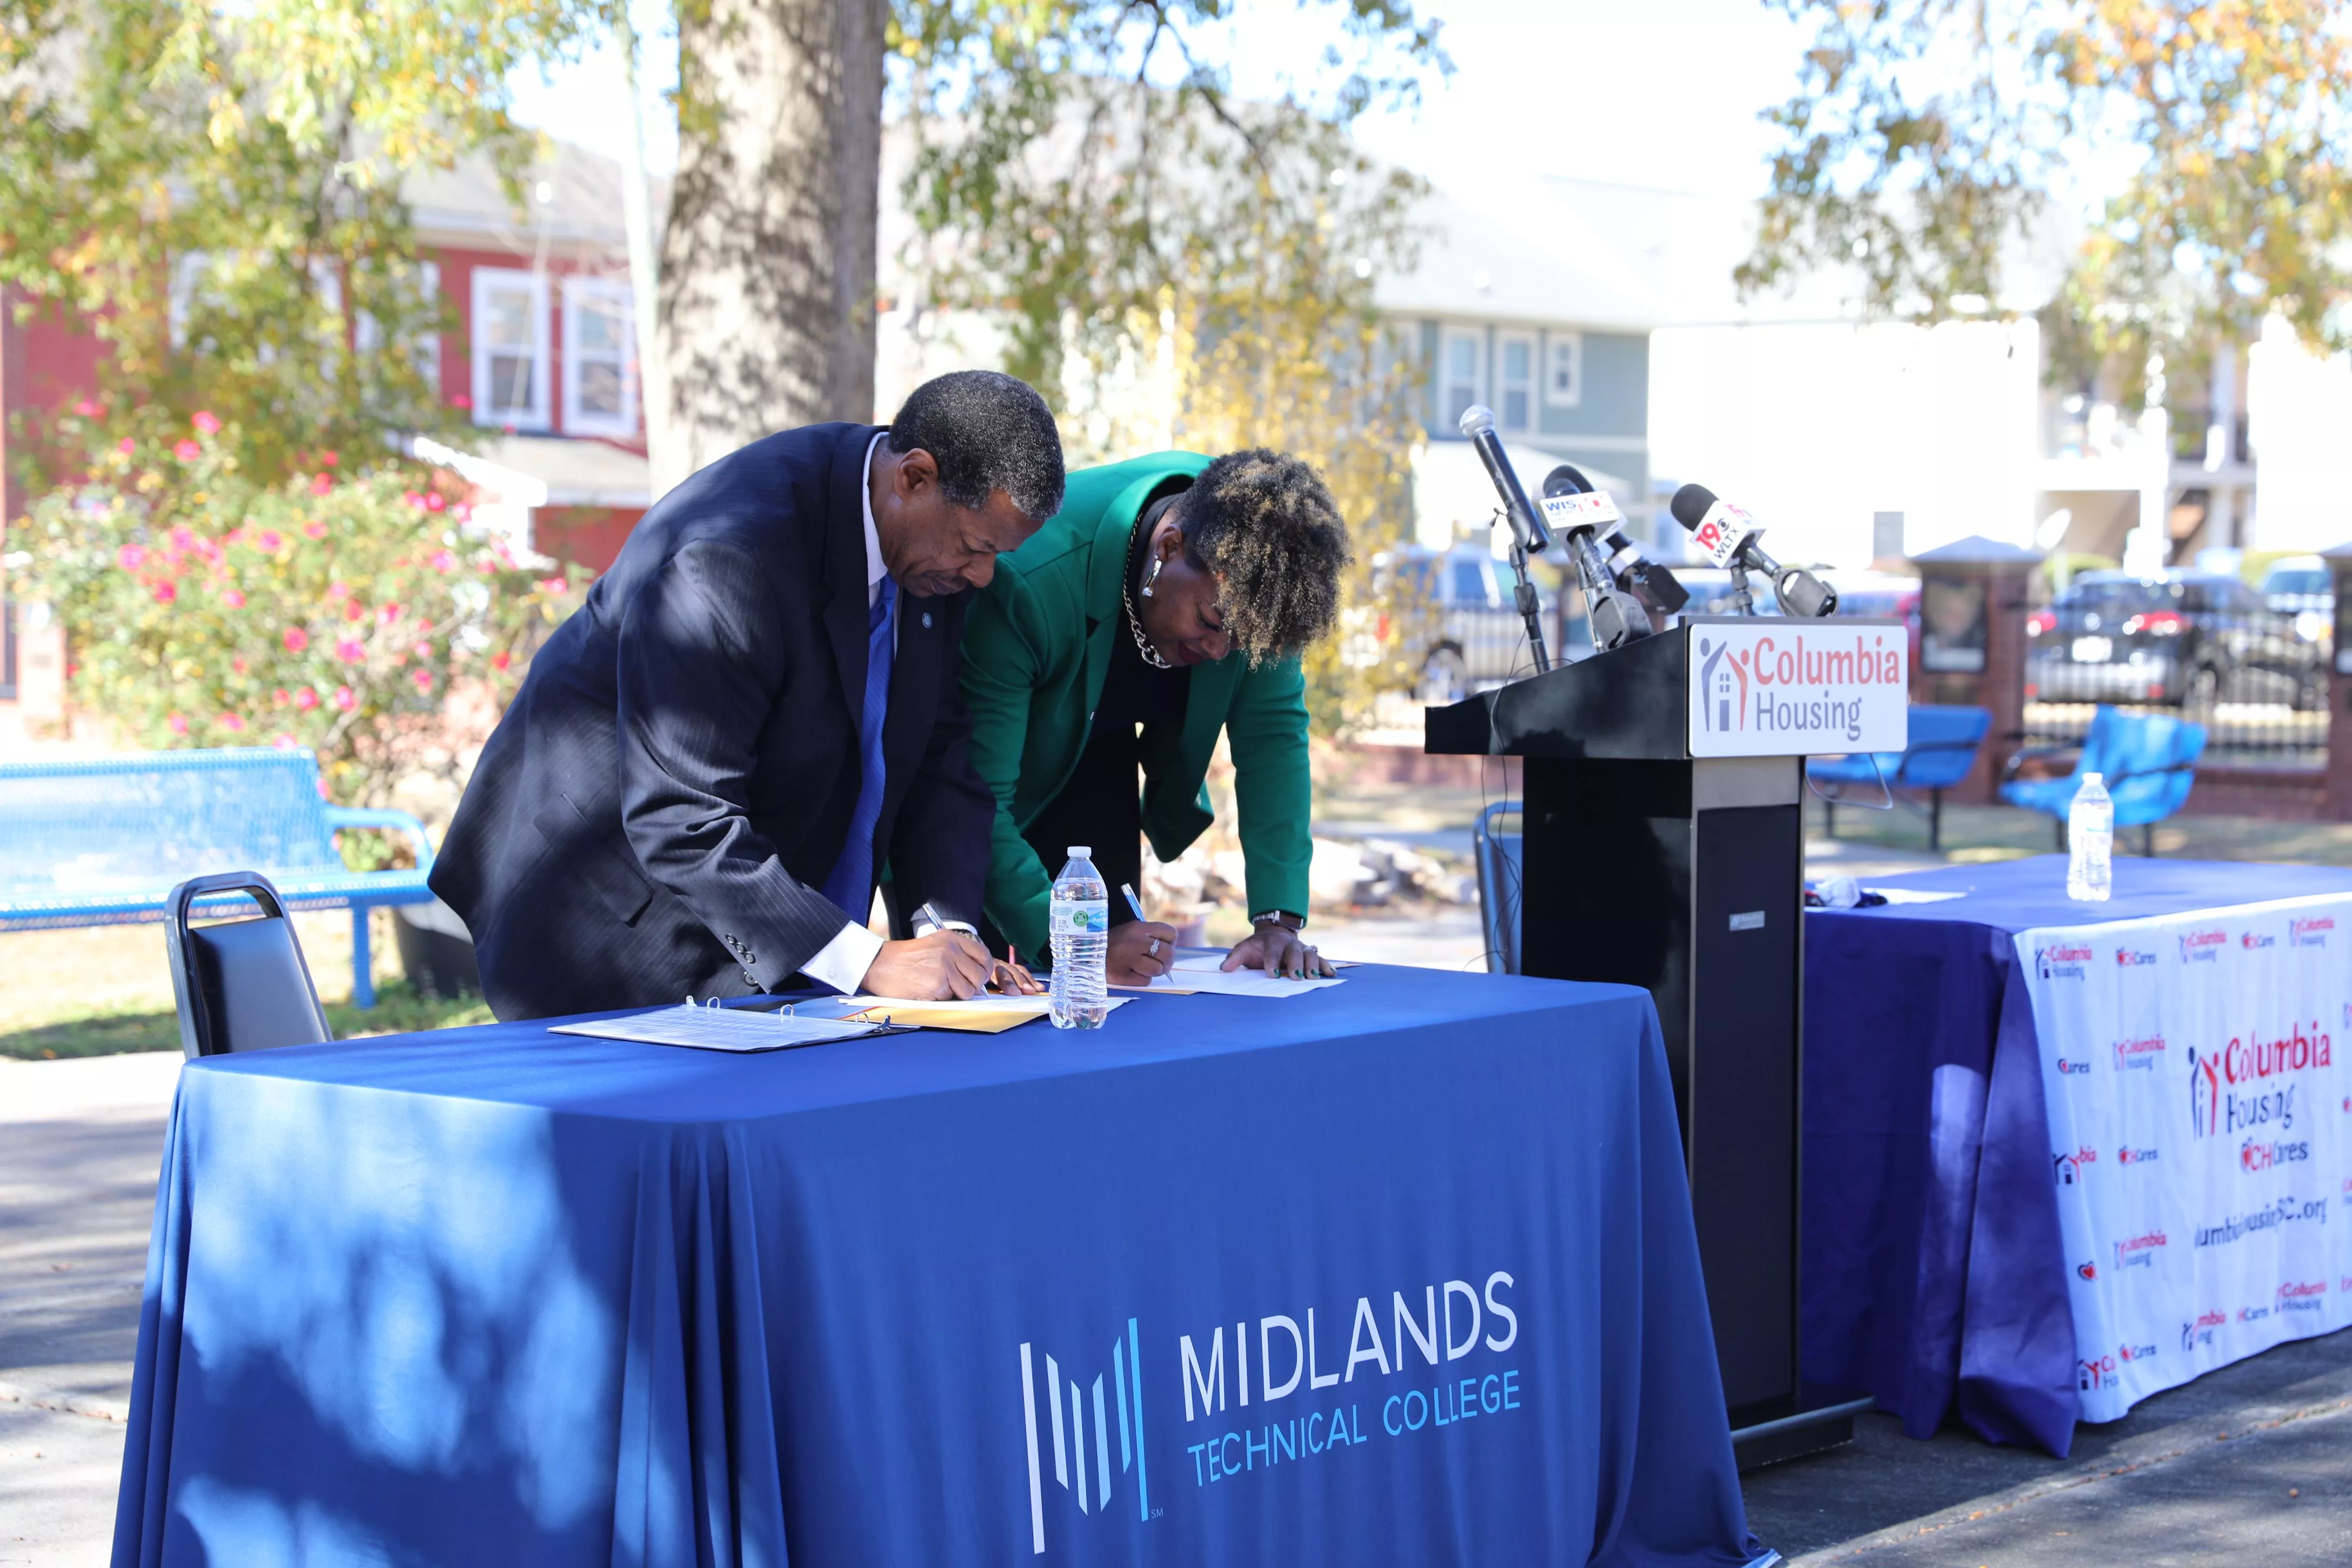 A man and woman signing documents at an outdoor press conference